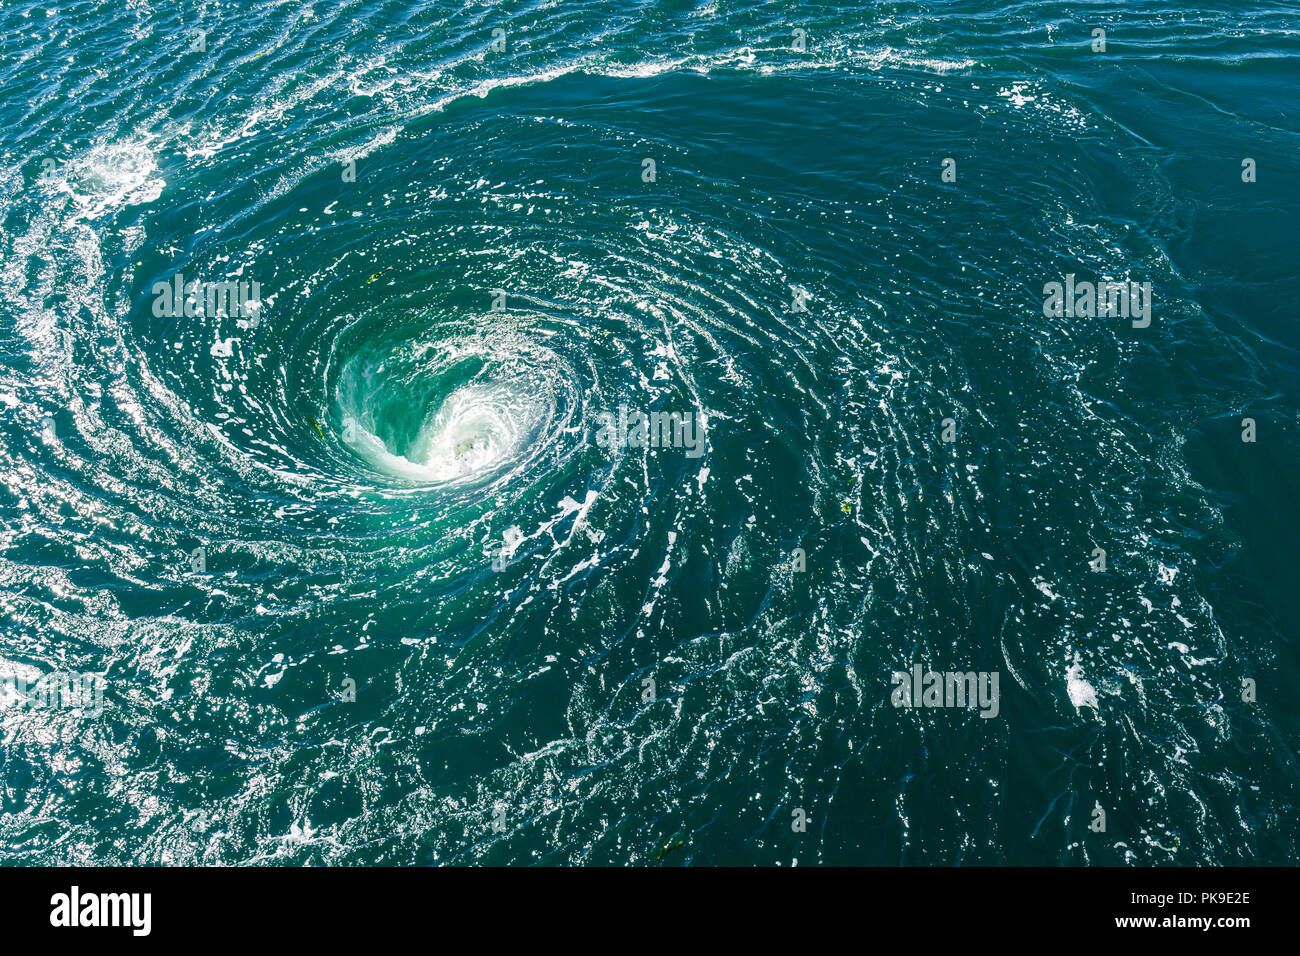 High angle view of a powerful whirlpool at the surface of green water with foam. Stock Photo